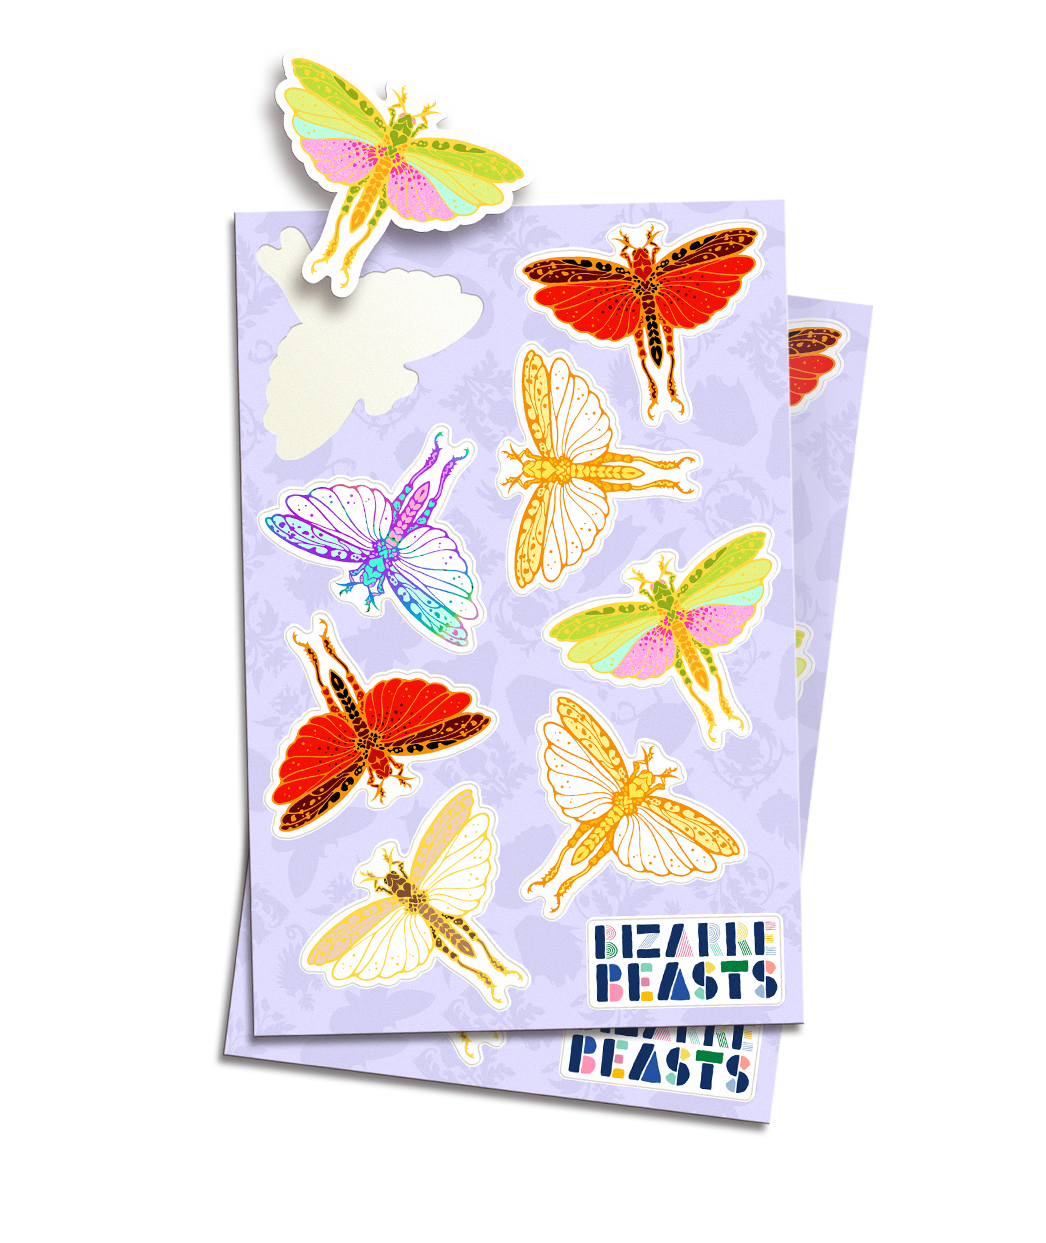 Five different designs of a drawing of a locust. Stickers are on a sheet with a lavender background with different bizarre beasts designs in silhouette. “Bizarre Beasts” is in the bottom right corner, each letter formed out of geometric shapes in varying colors - from Bizarre Beasts 